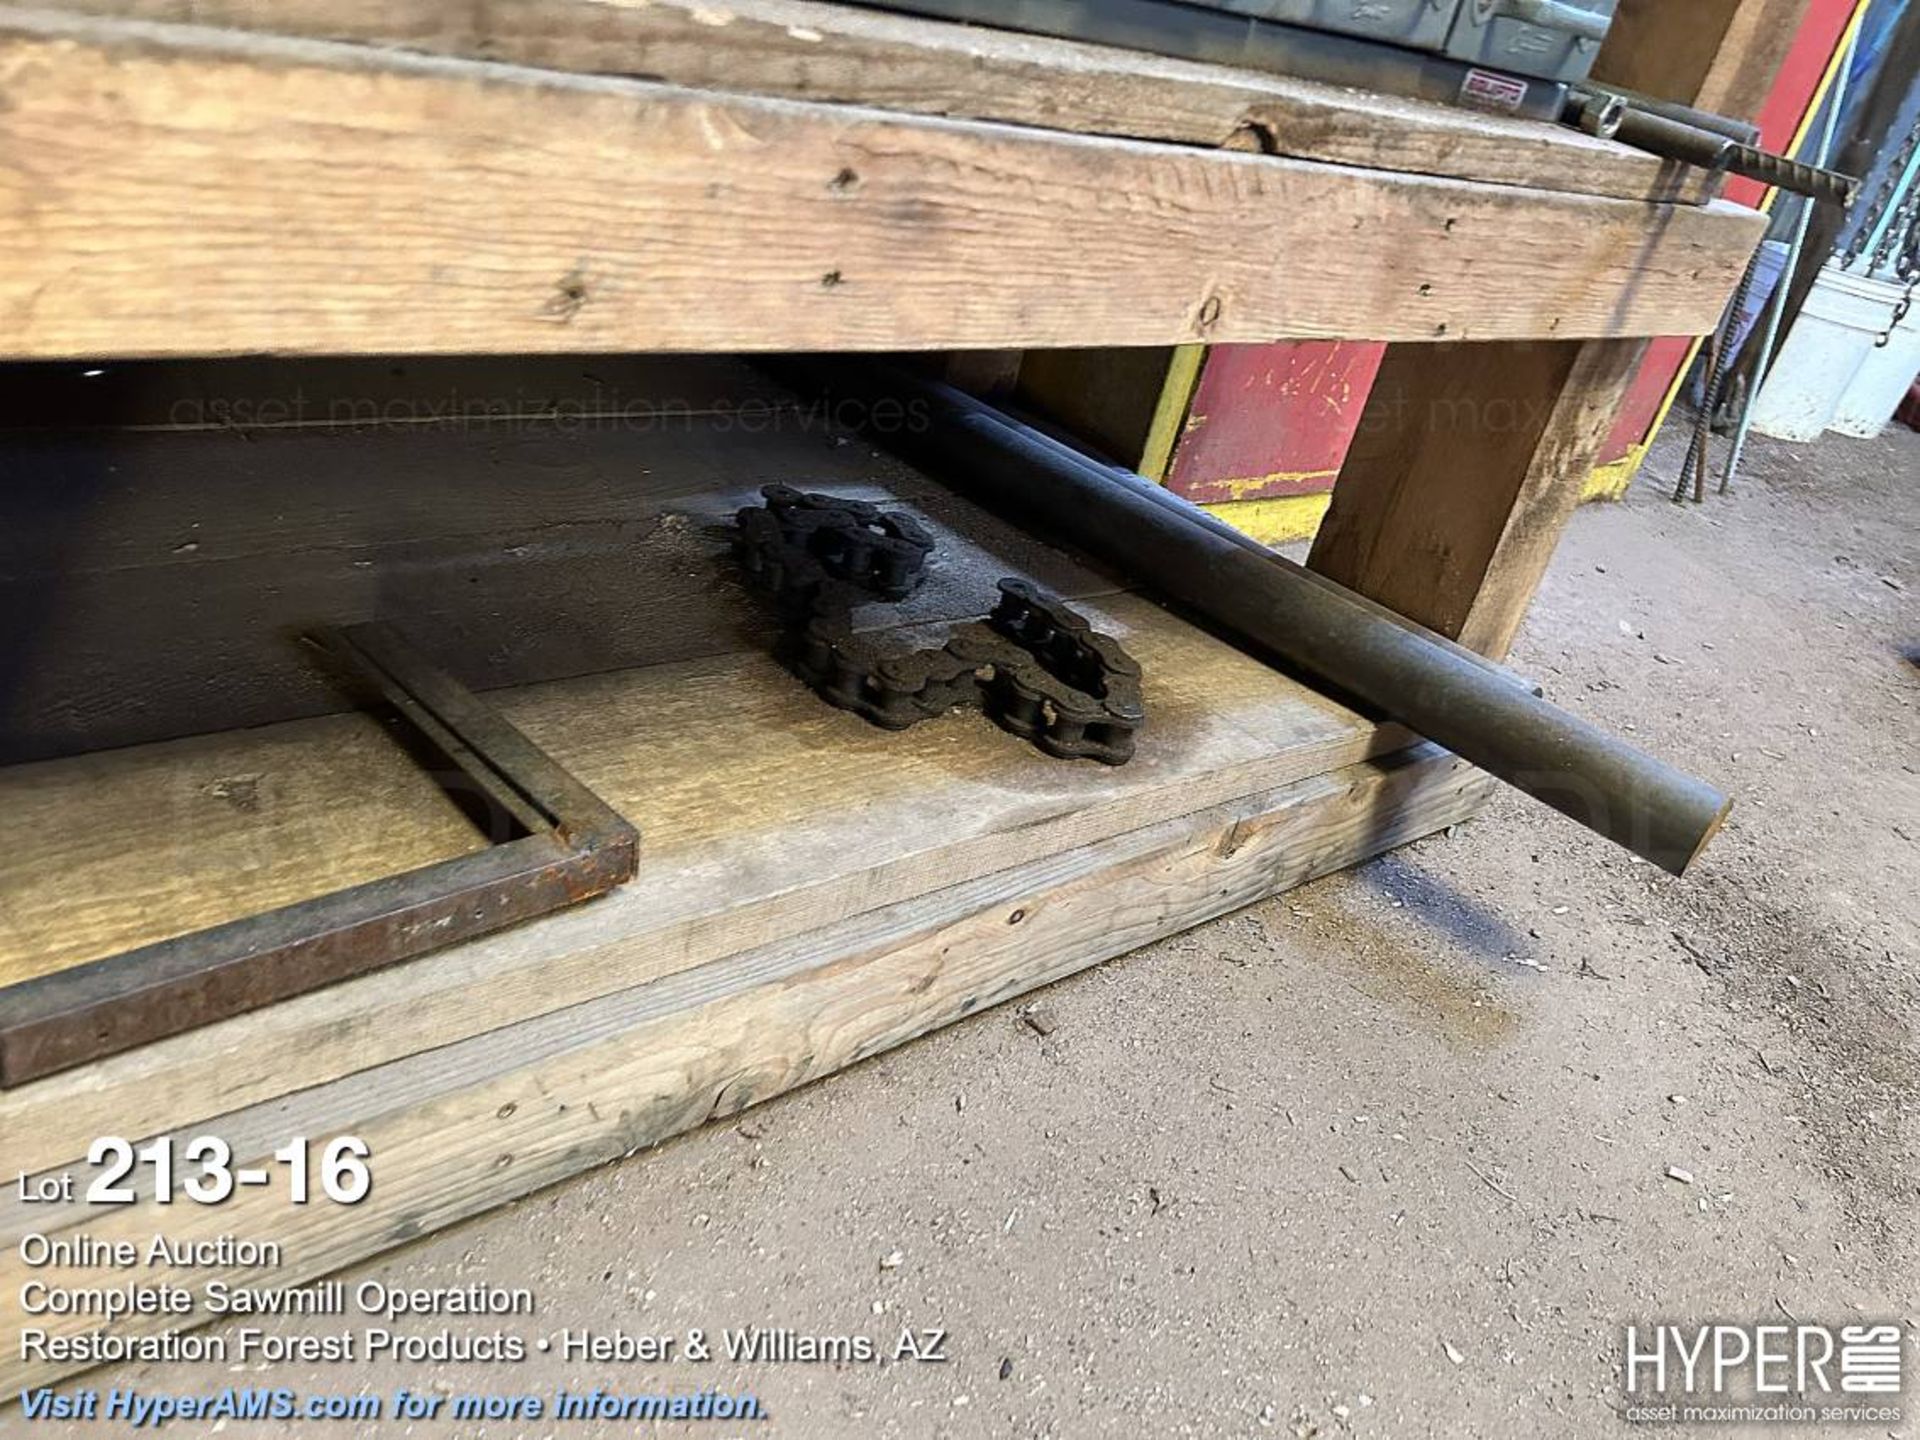 Lot: Wood shelf with cabinets, washers, bolts, screws, and tooling - Image 16 of 16